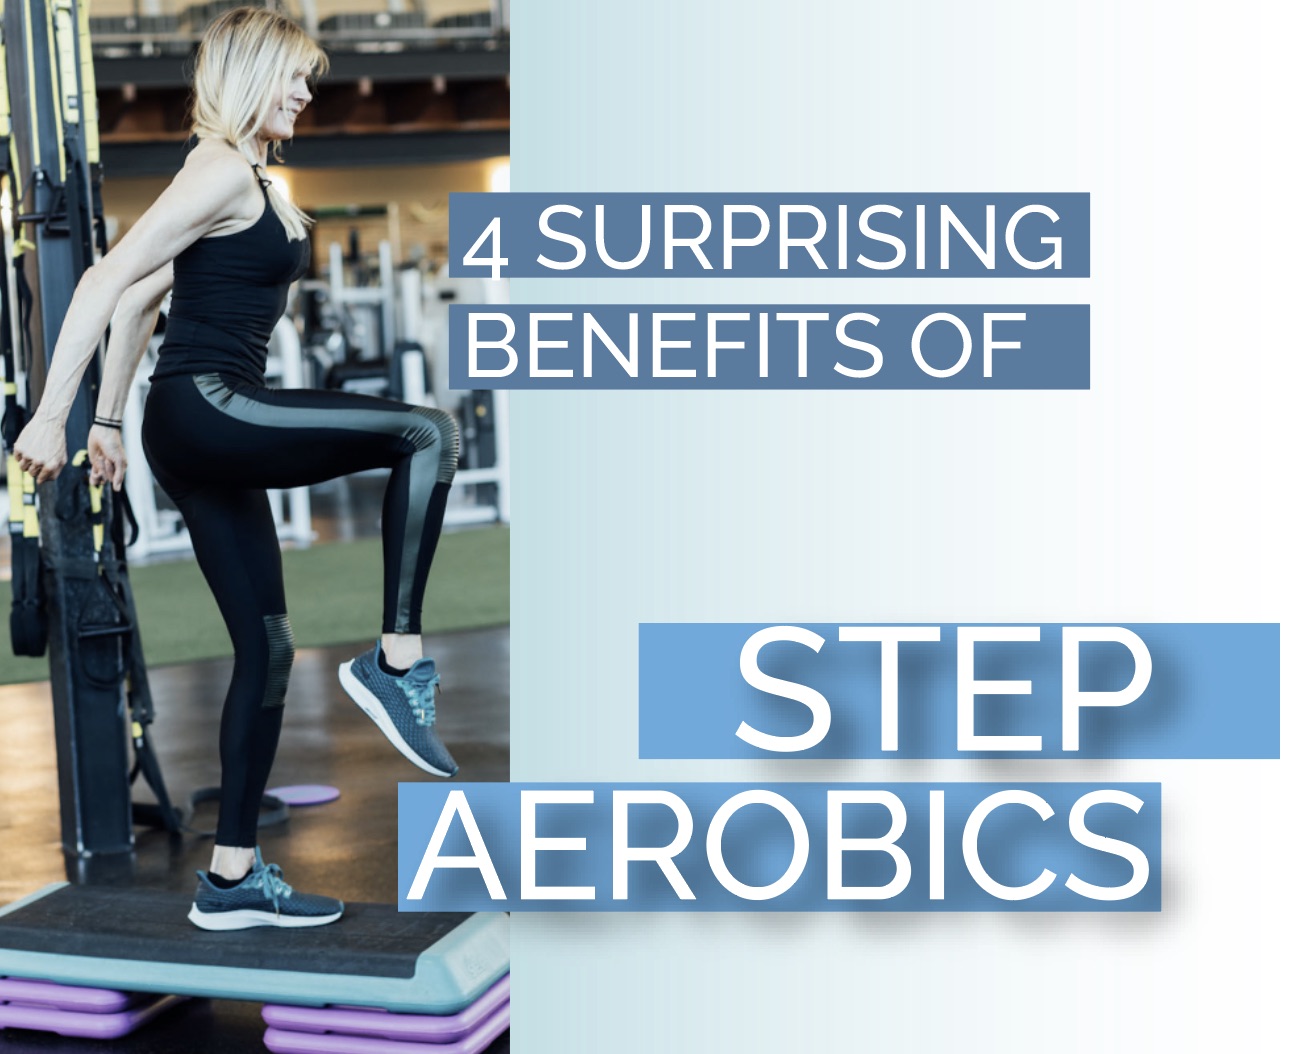 Benefits of Step Aerobics - Weight Loss Results